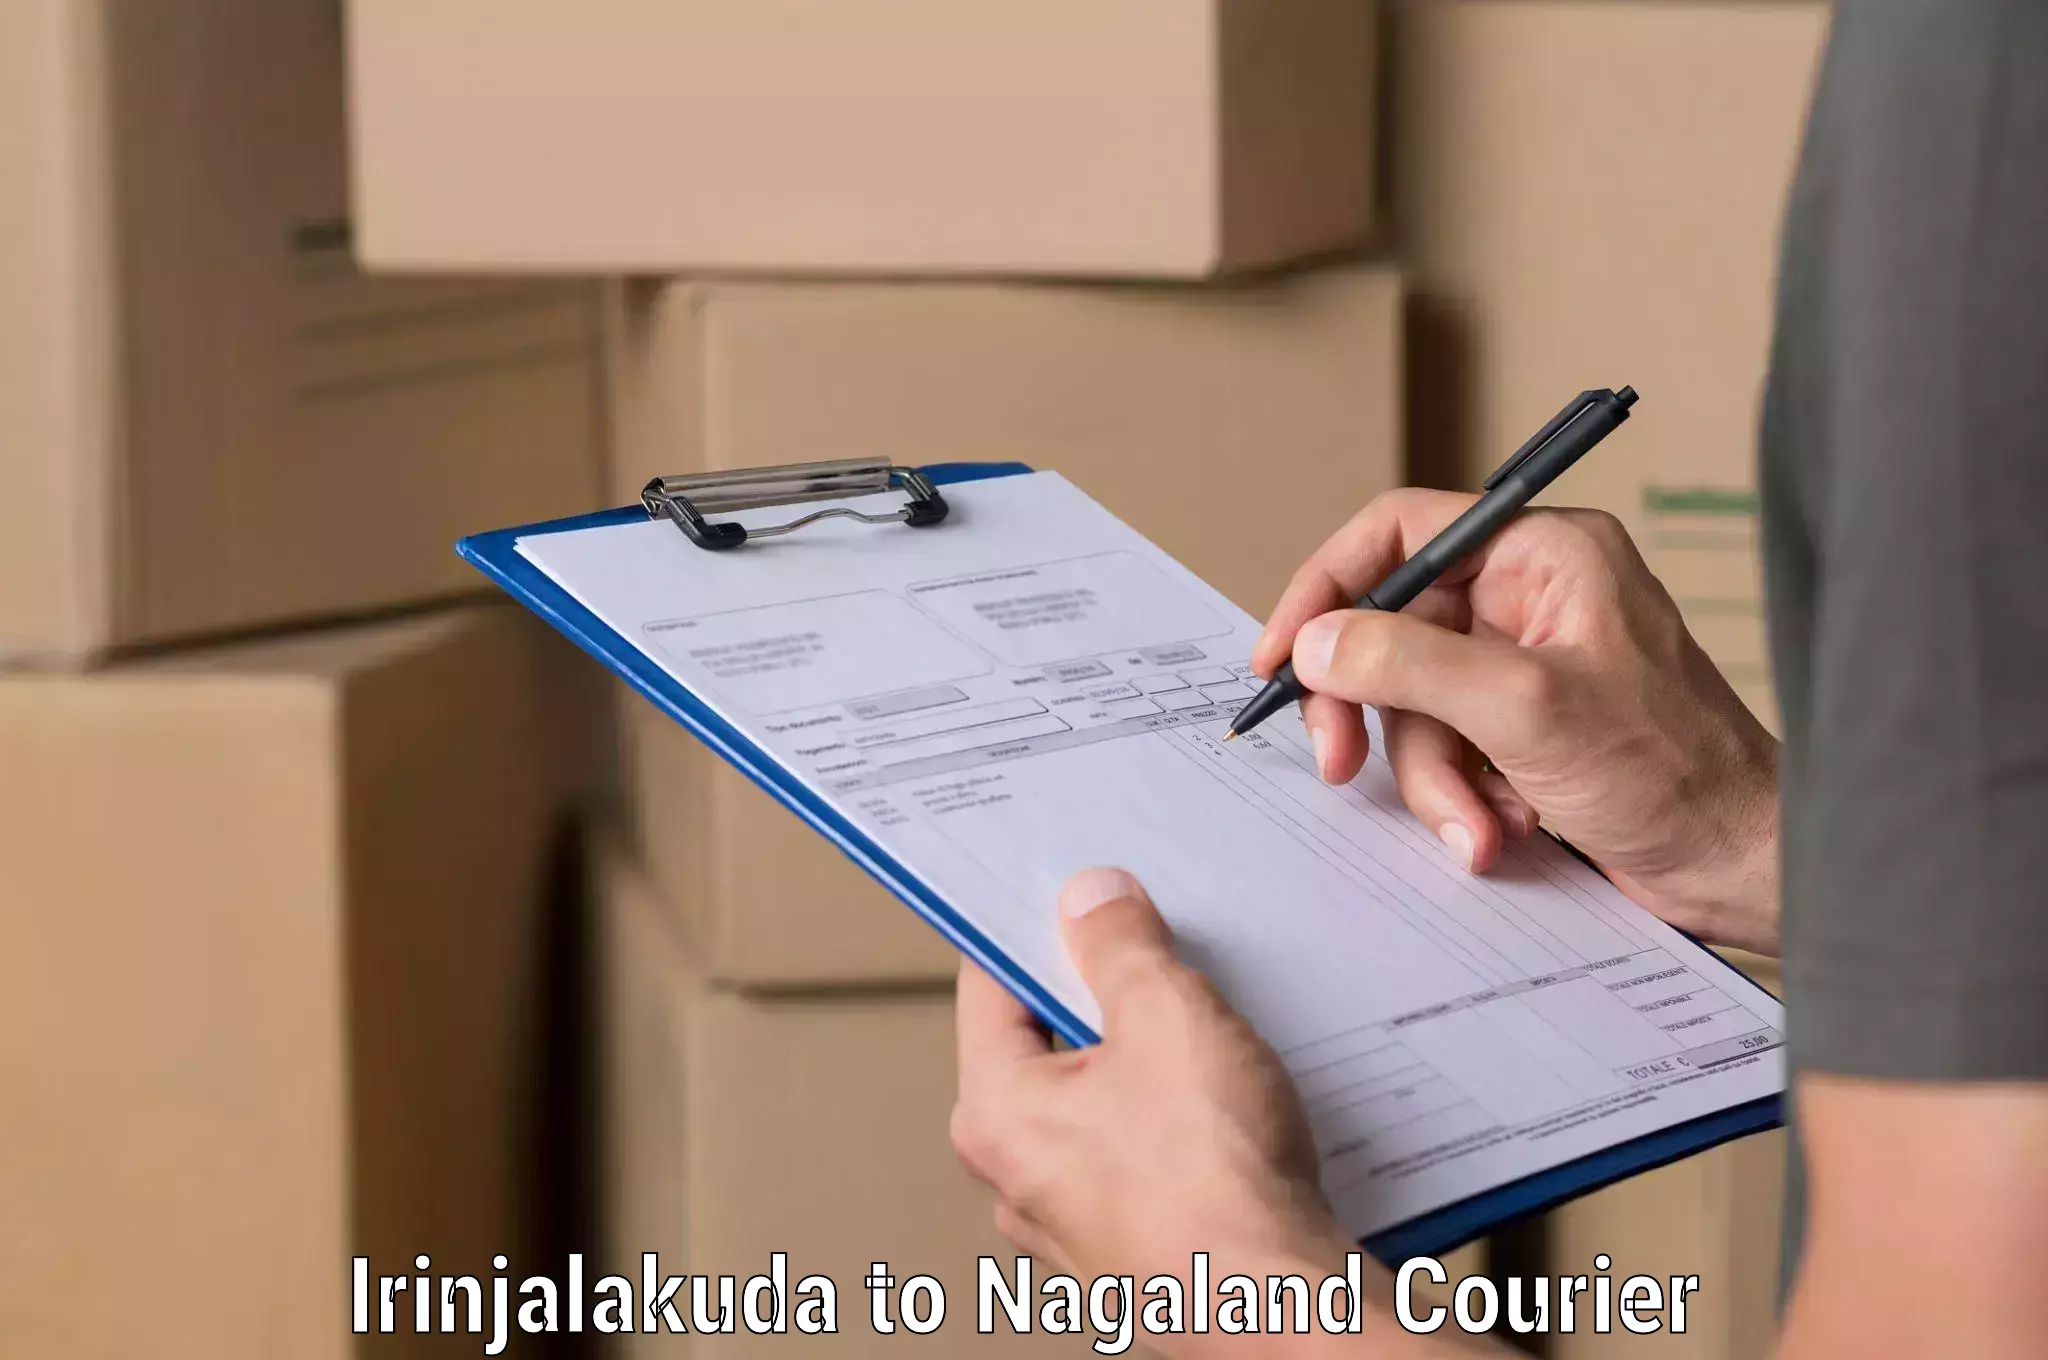 Rural area delivery in Irinjalakuda to Nagaland